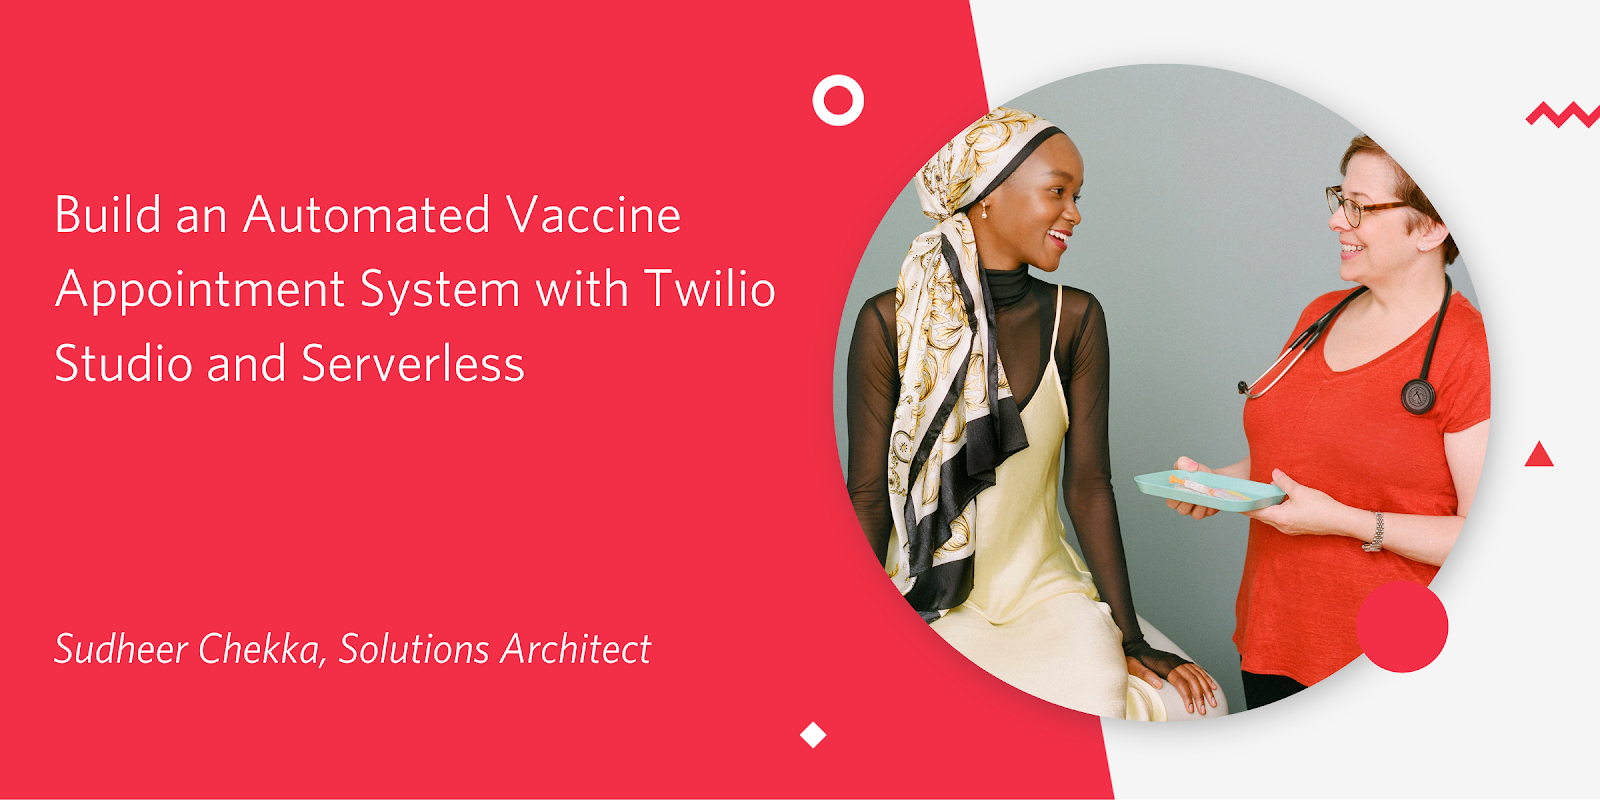 Build an Automated Vaccine Appointment System with Twilio Studio and Serverless